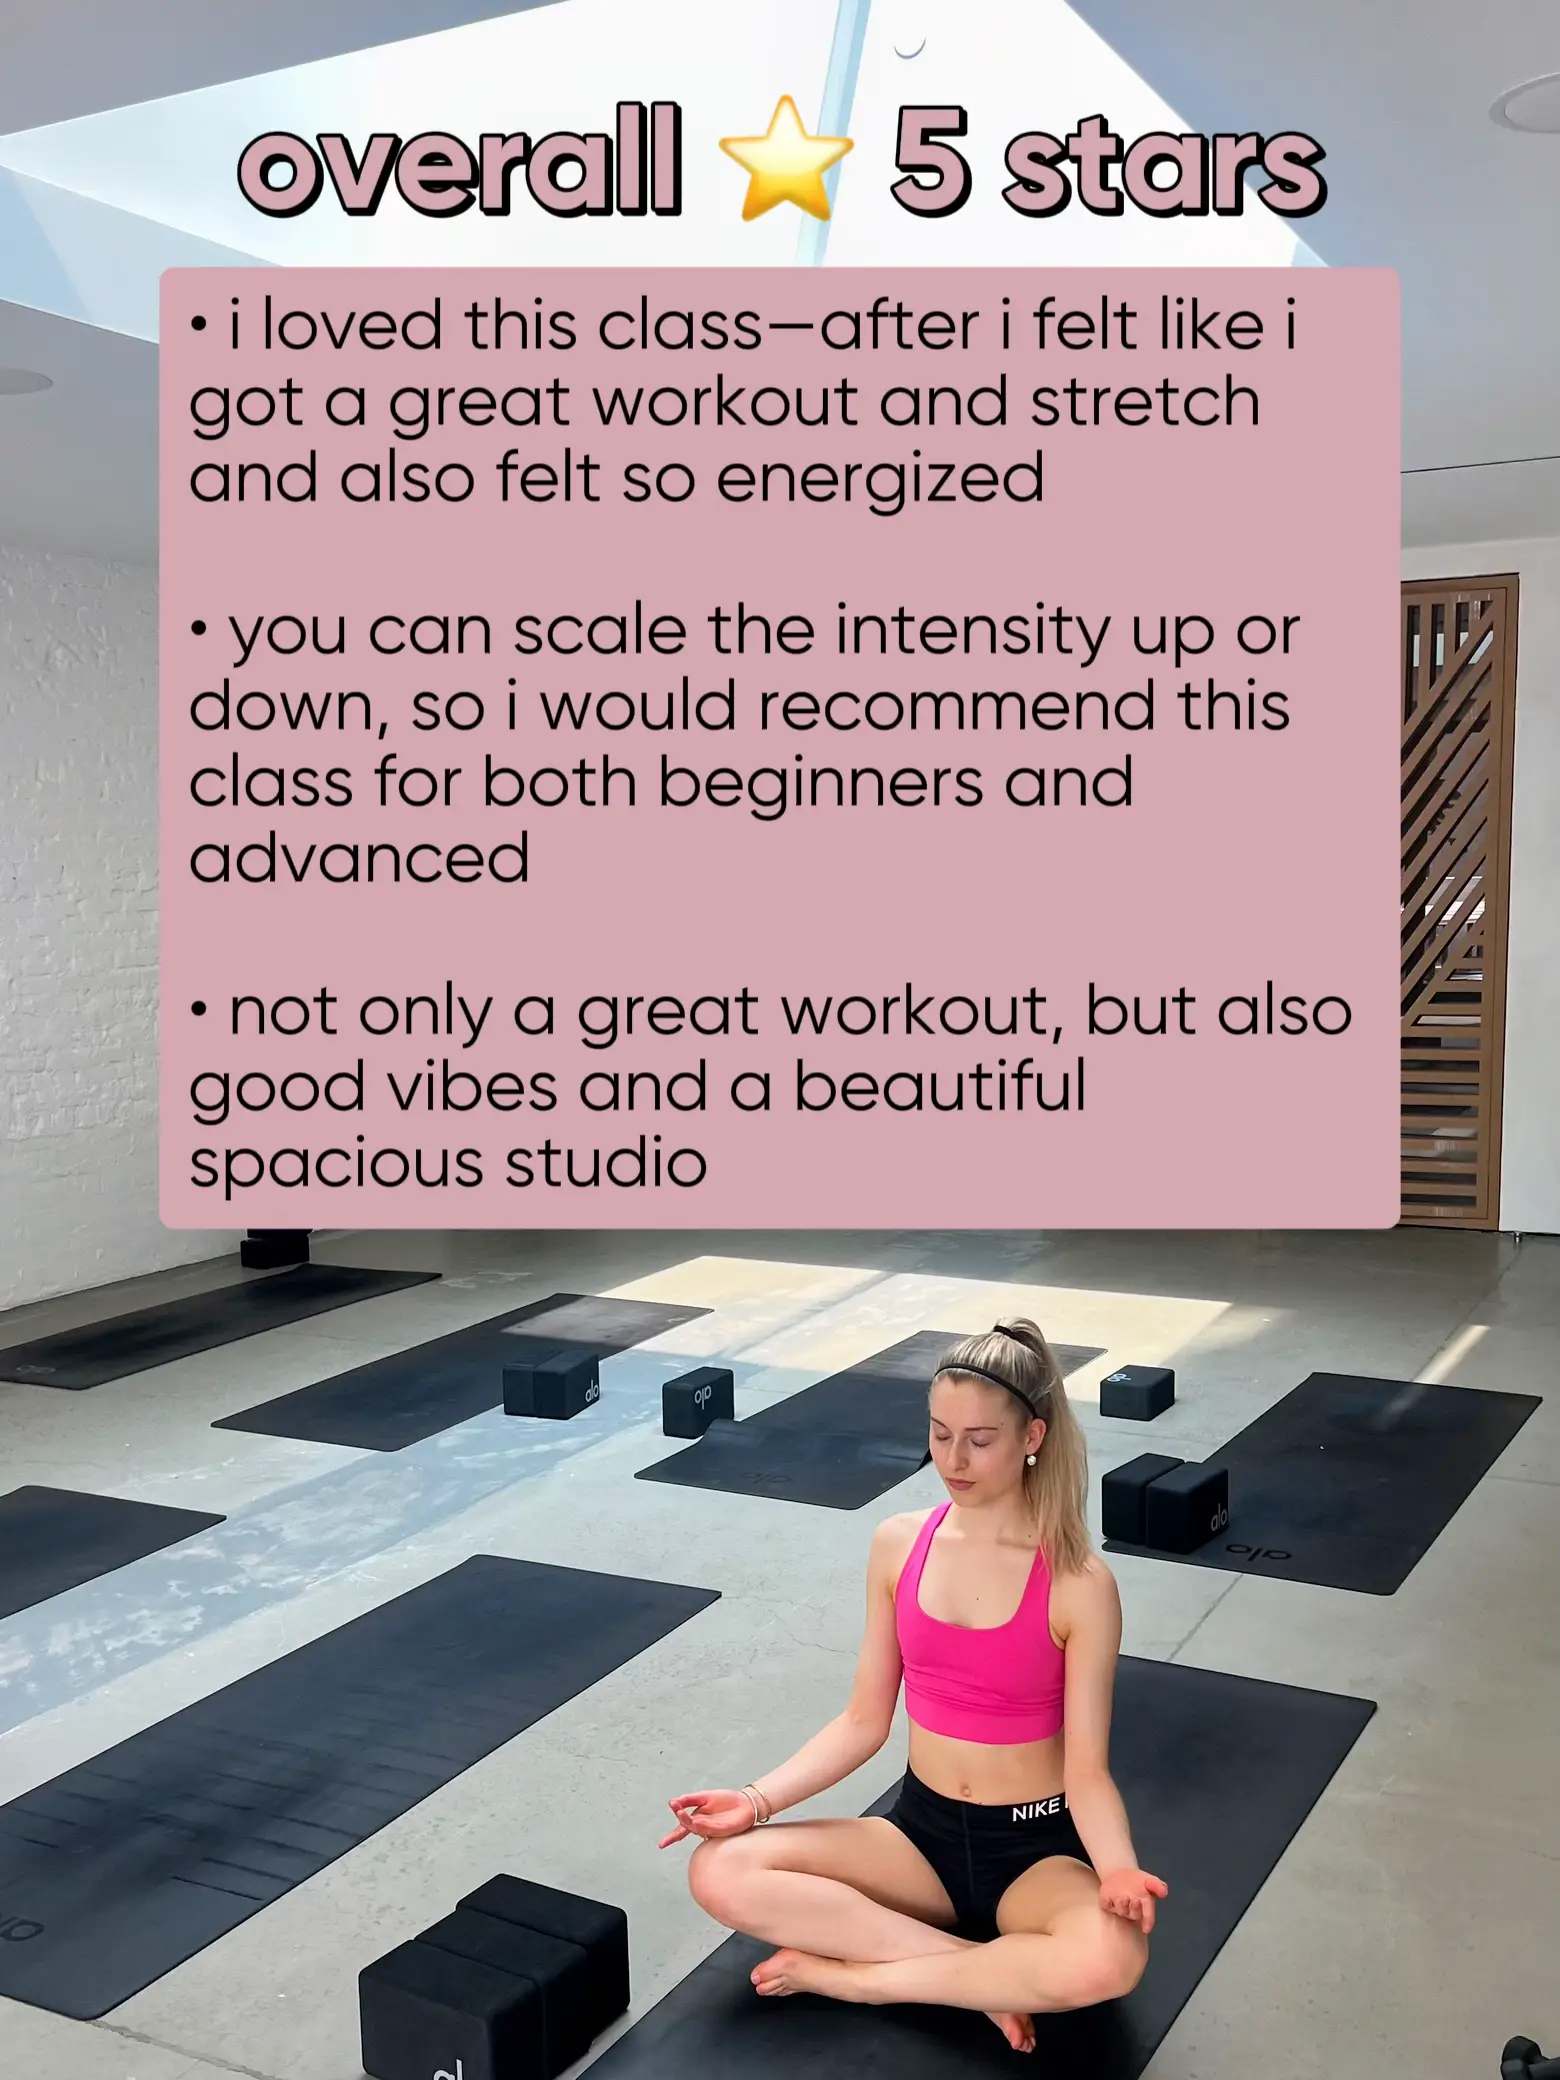 Sui Yoga - Soho: Read Reviews and Book Classes on ClassPass